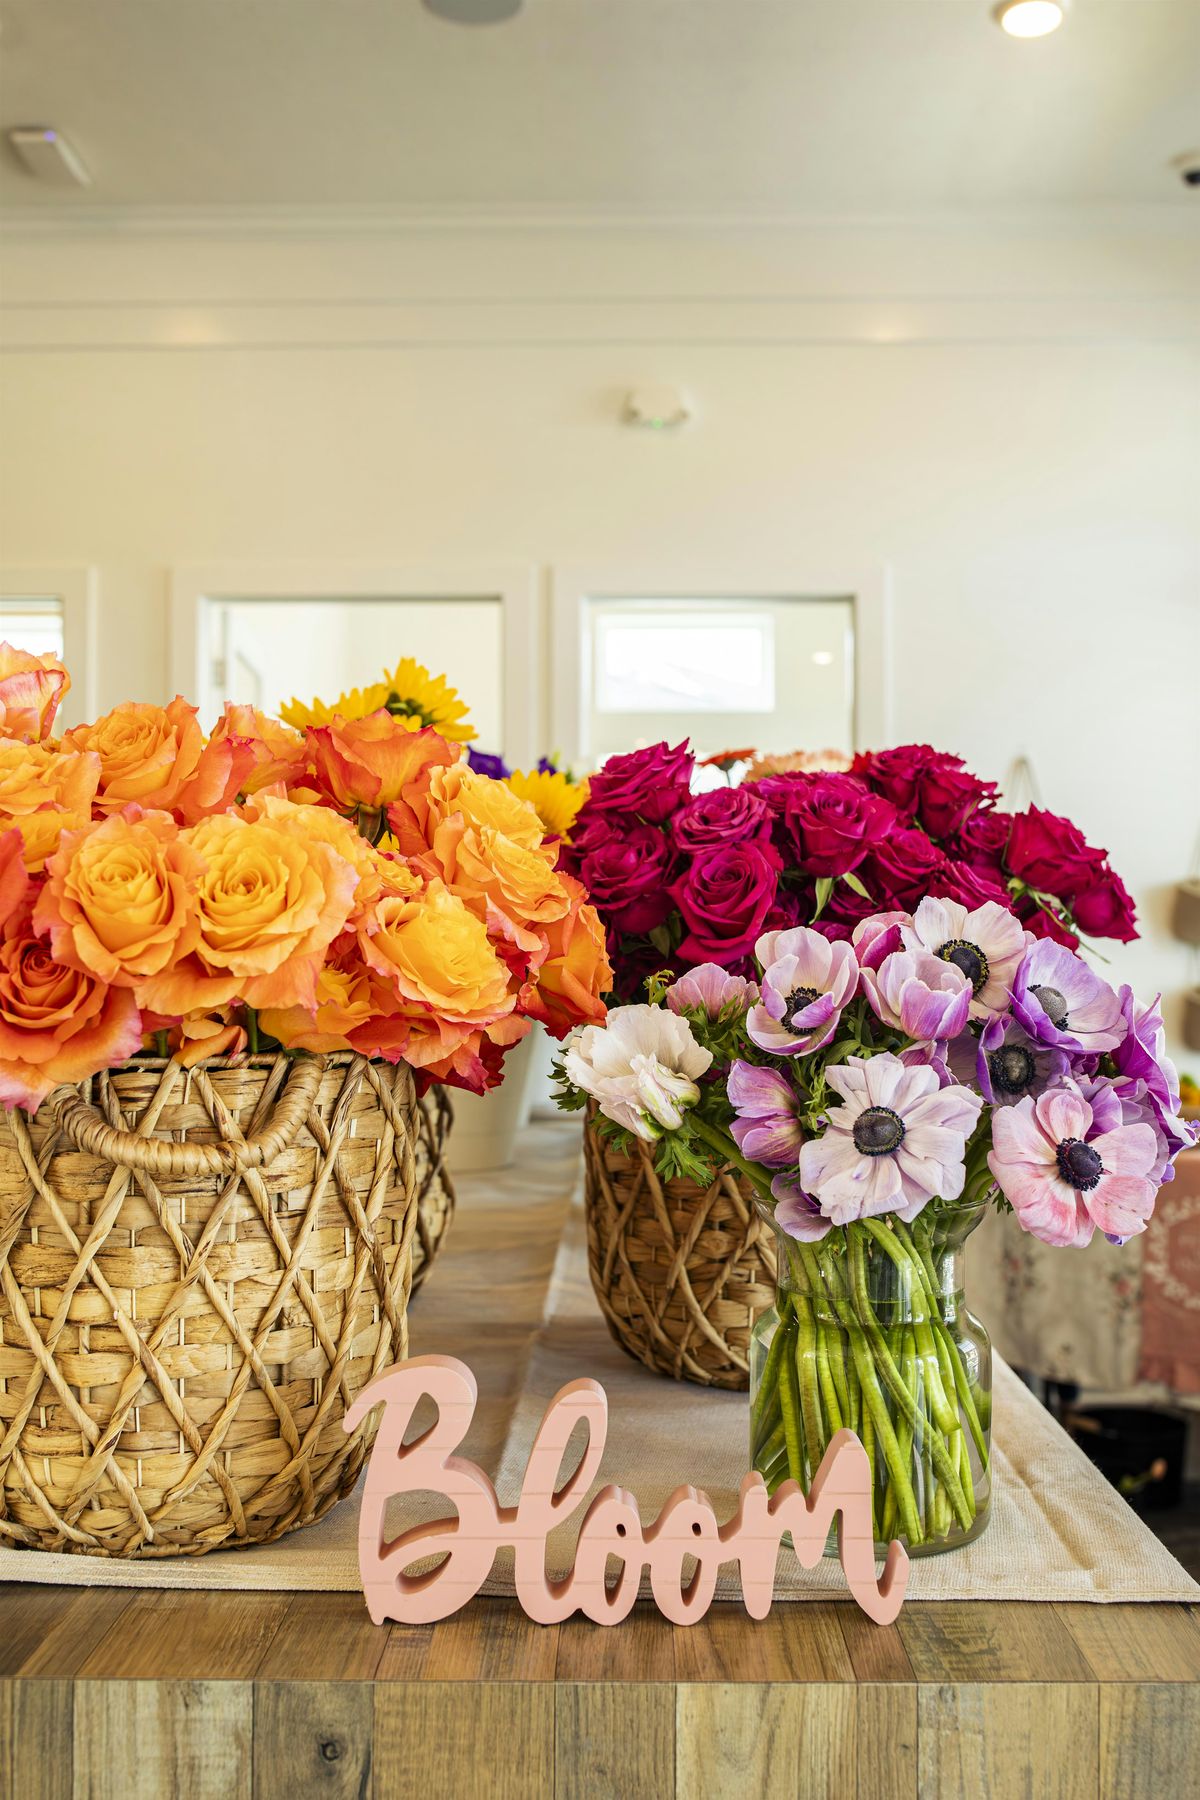 Build-Your-Own Bouquet Bar for Mother's Day!